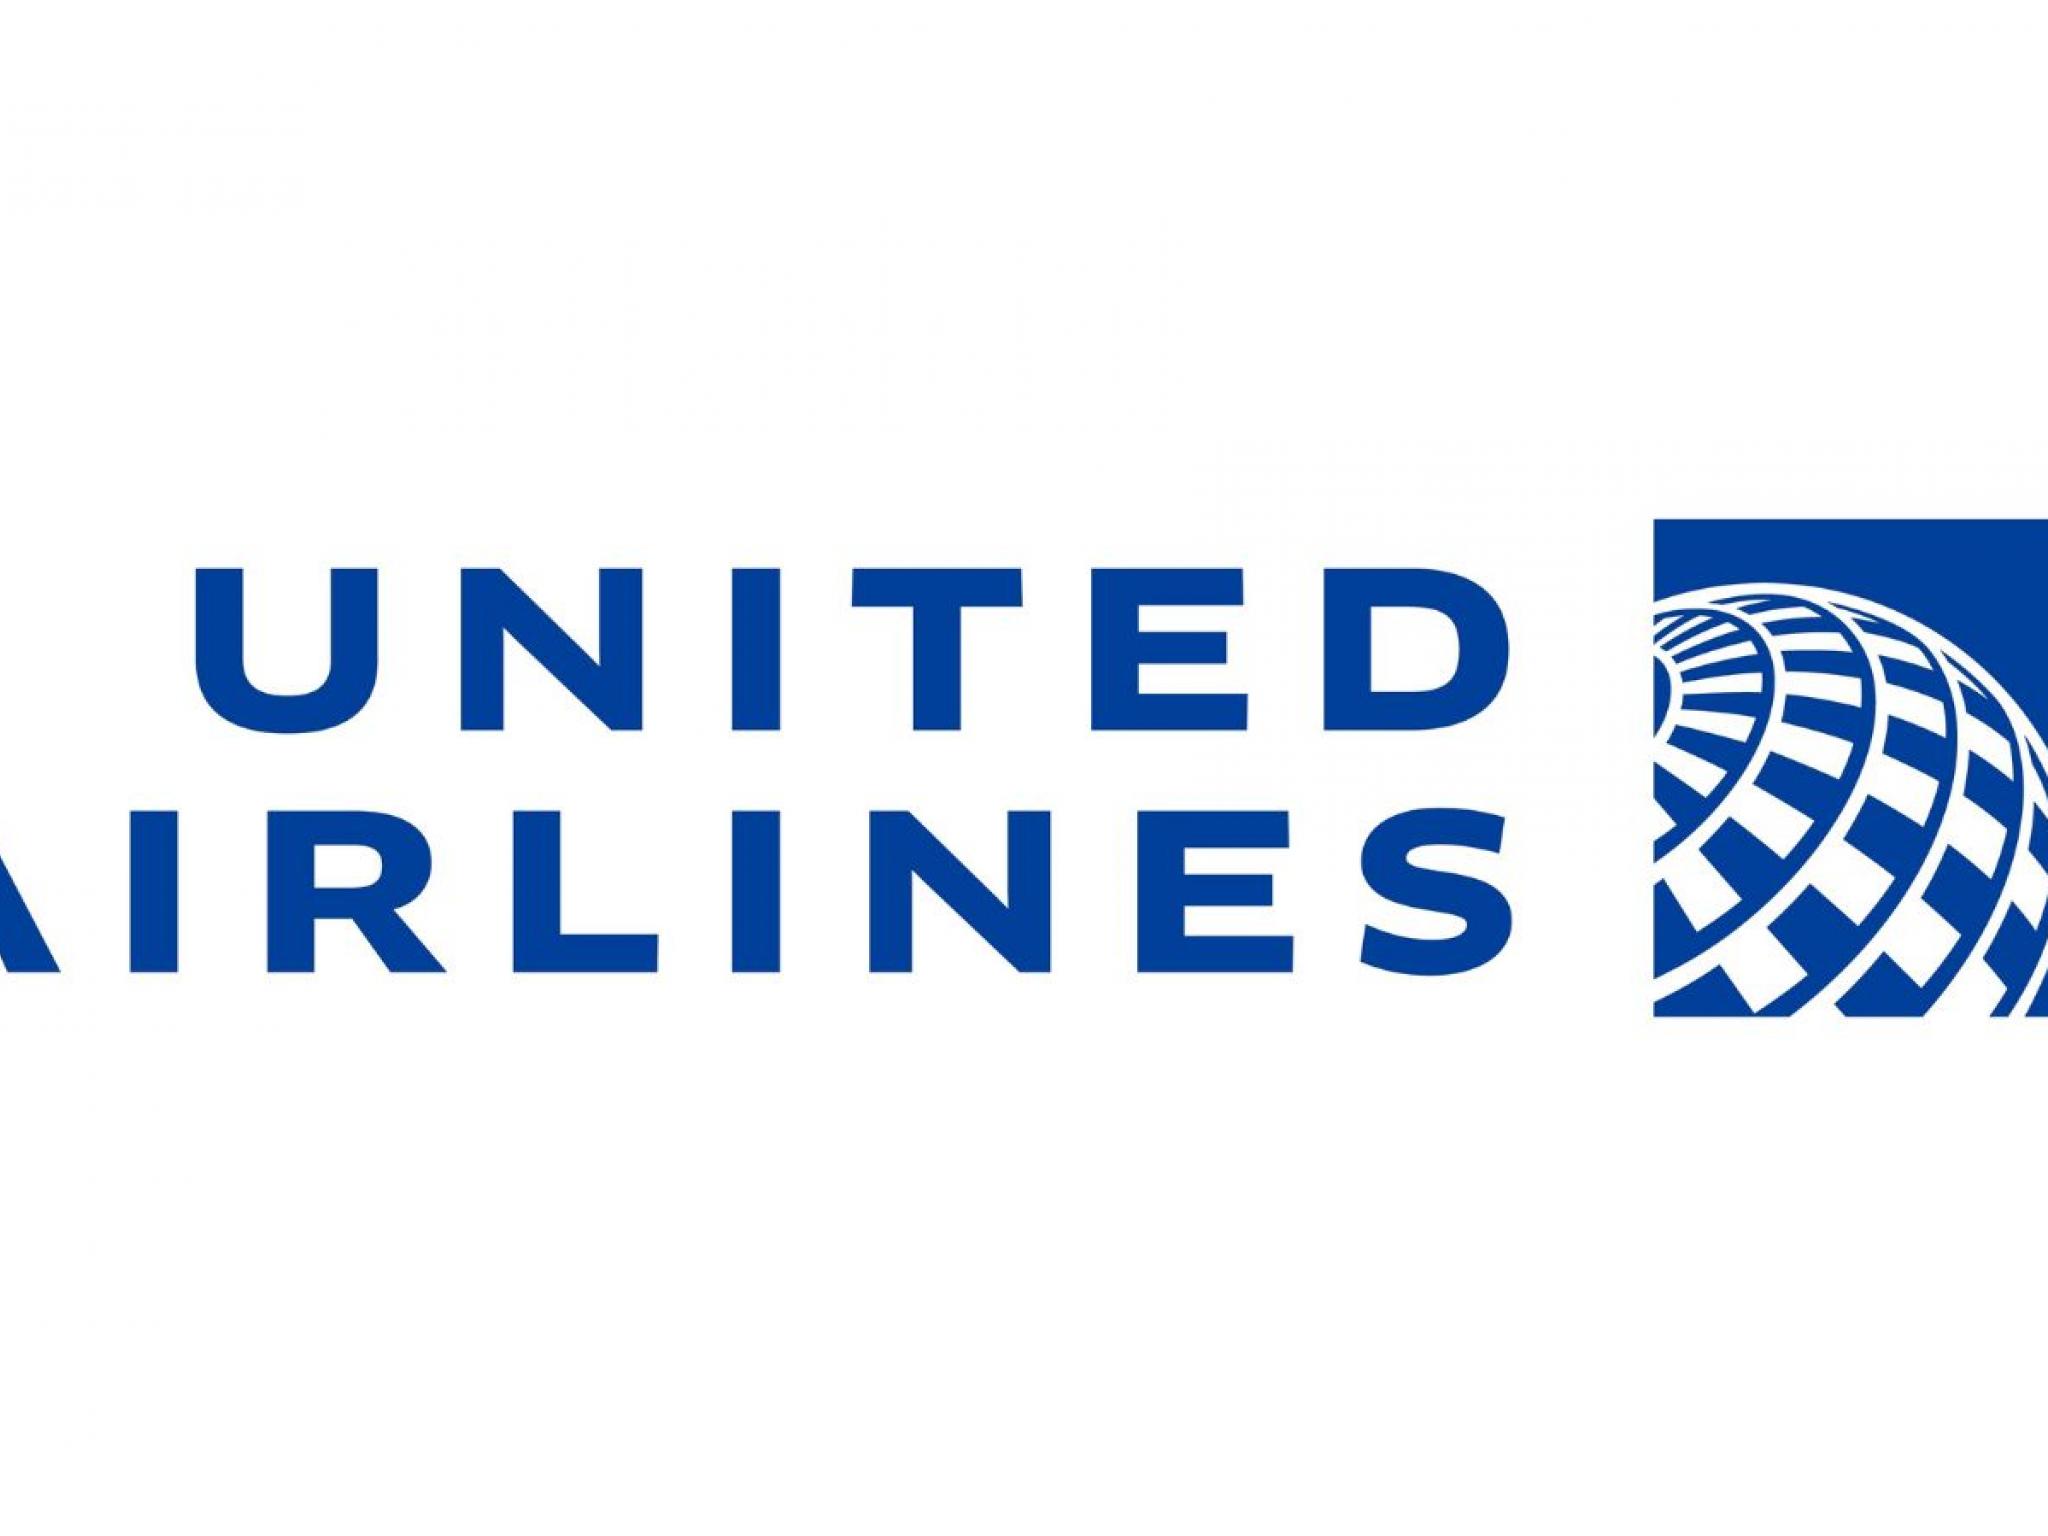 United Airlines Reports Upbeat Results, Joins Children’s Place, Interactive Brokers And Other Big Stocks Moving Higher On Wednesday